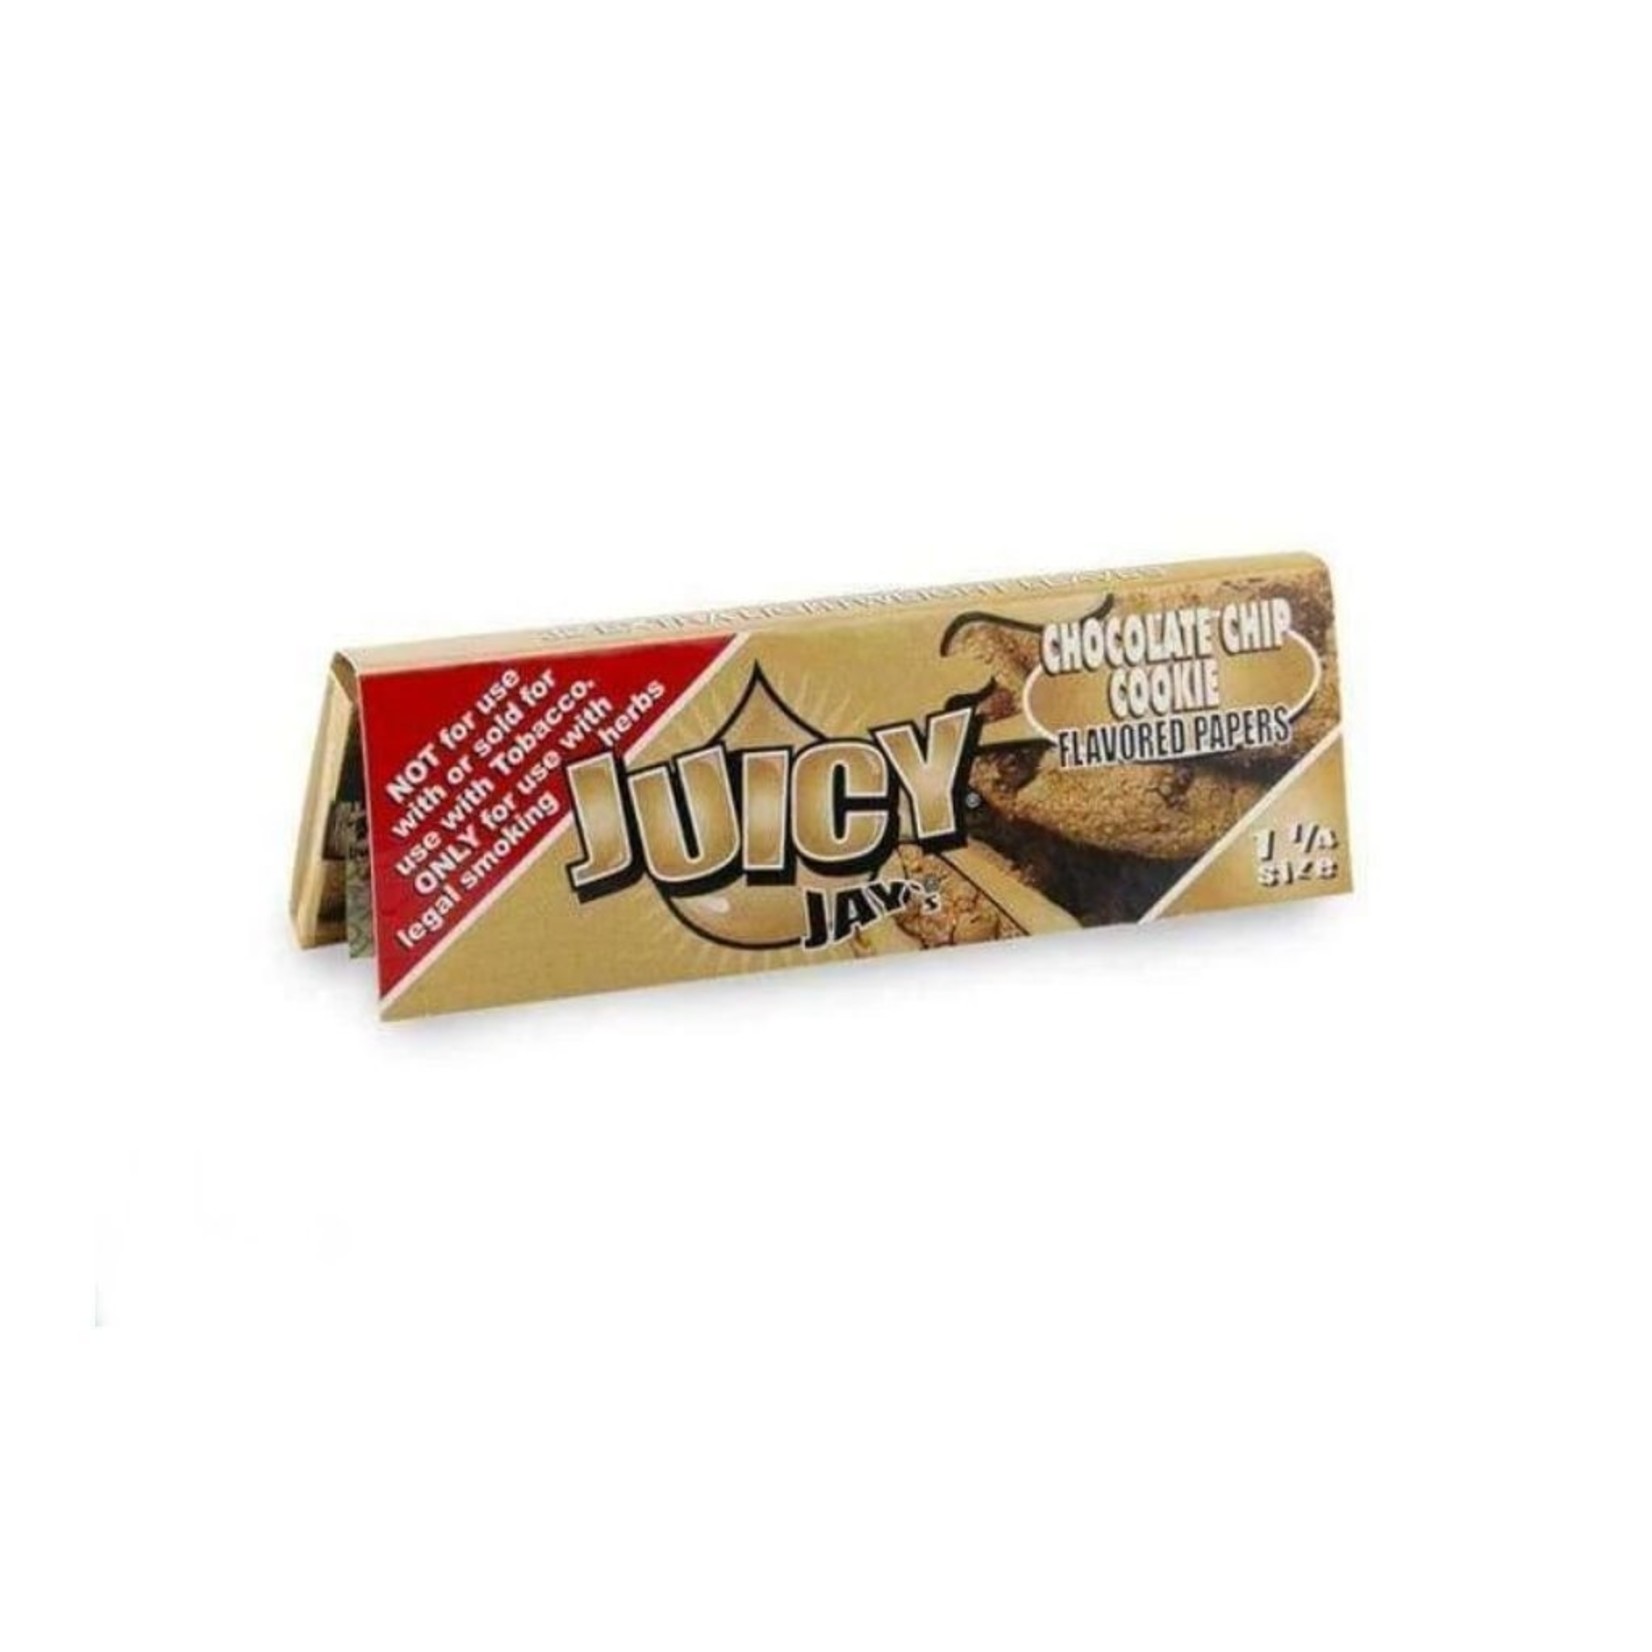 Juicy Jay's Juicy Jay’s Rolling Papers – Chocolate Chip Cookie